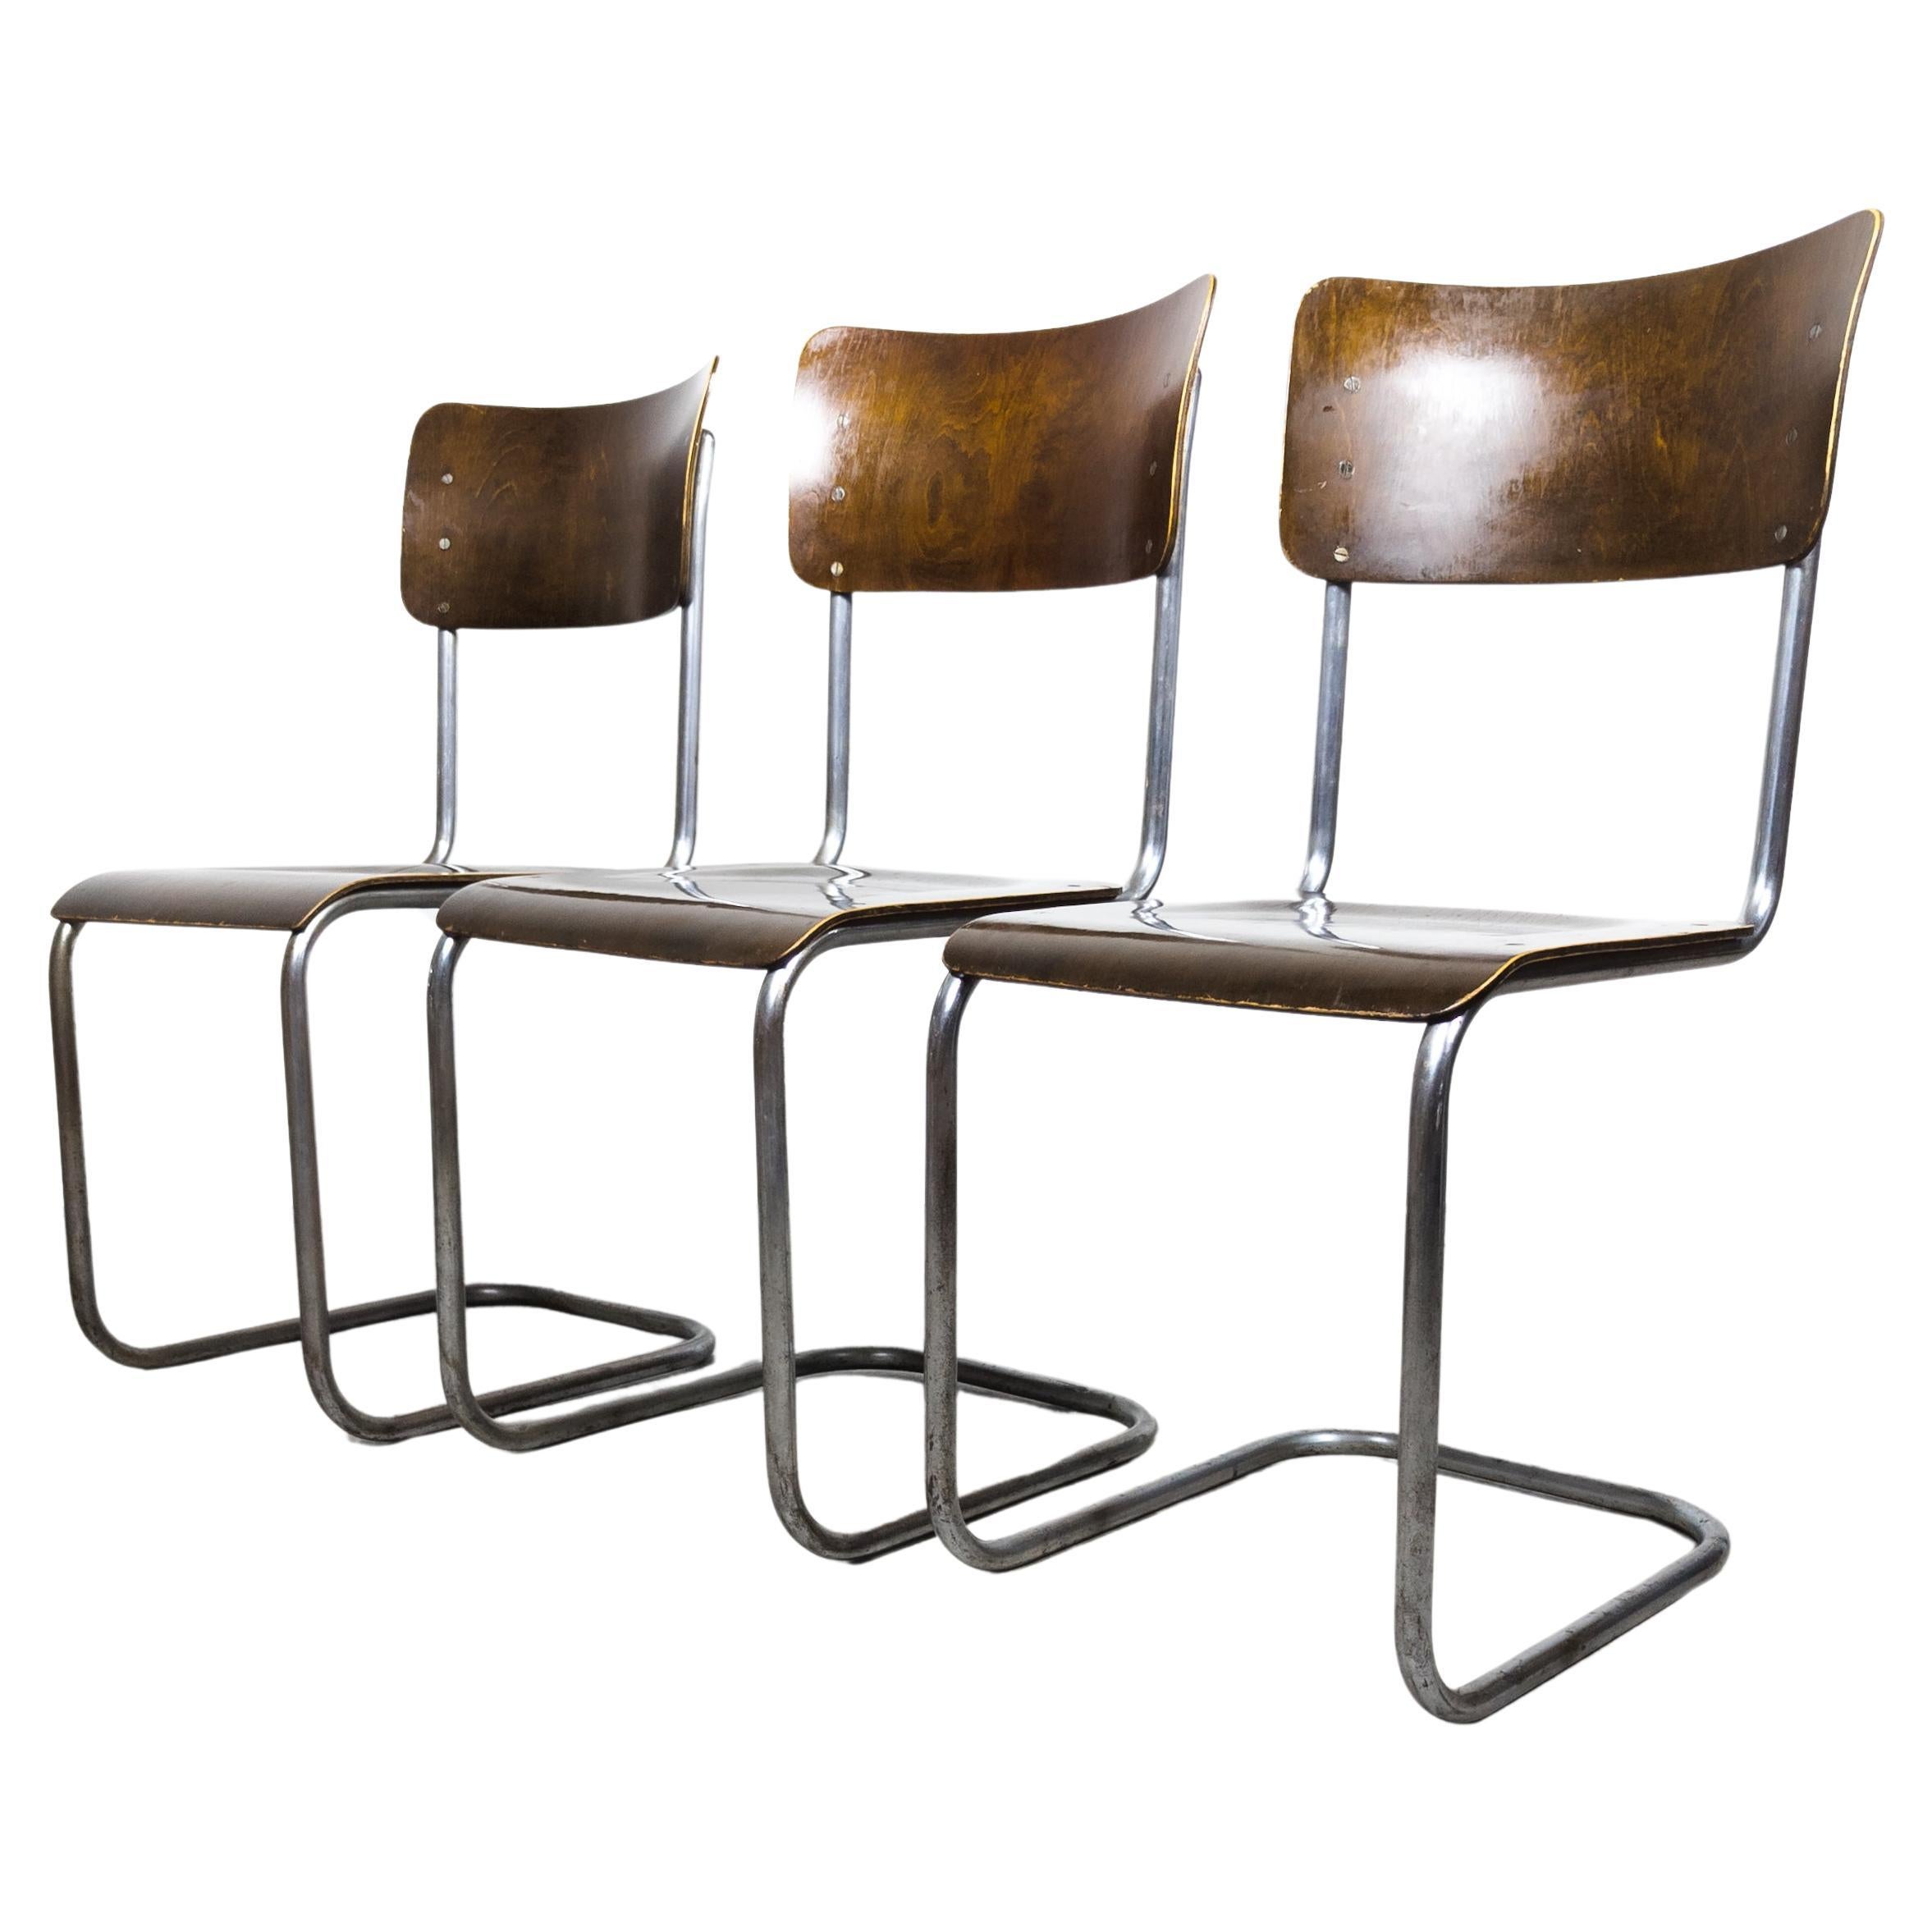 Early S 43 cantilever chairs by Mart Stam, 1930s For Sale